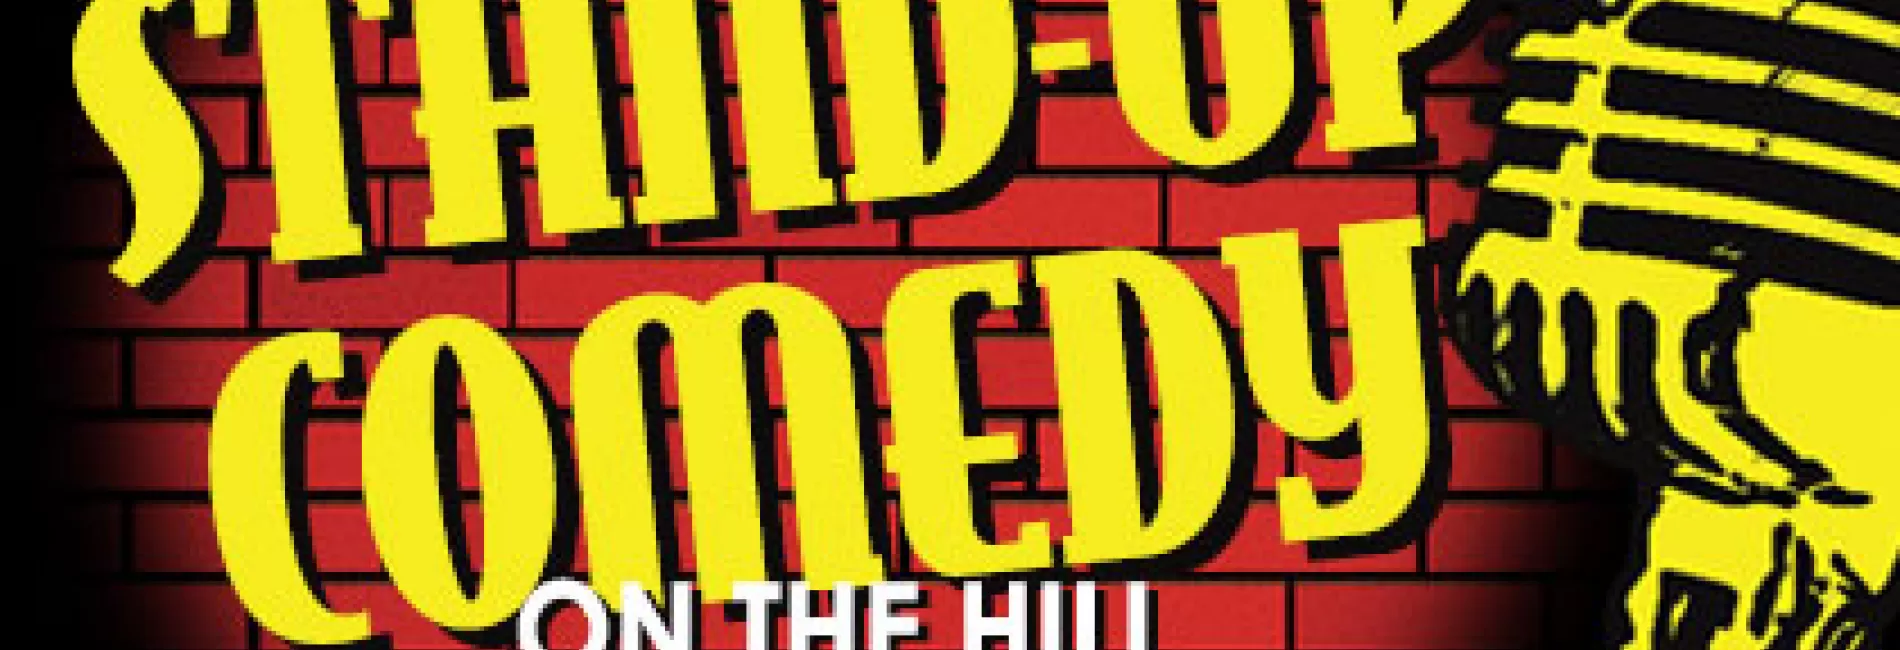 Stand-Up Comedy on the Hill: July